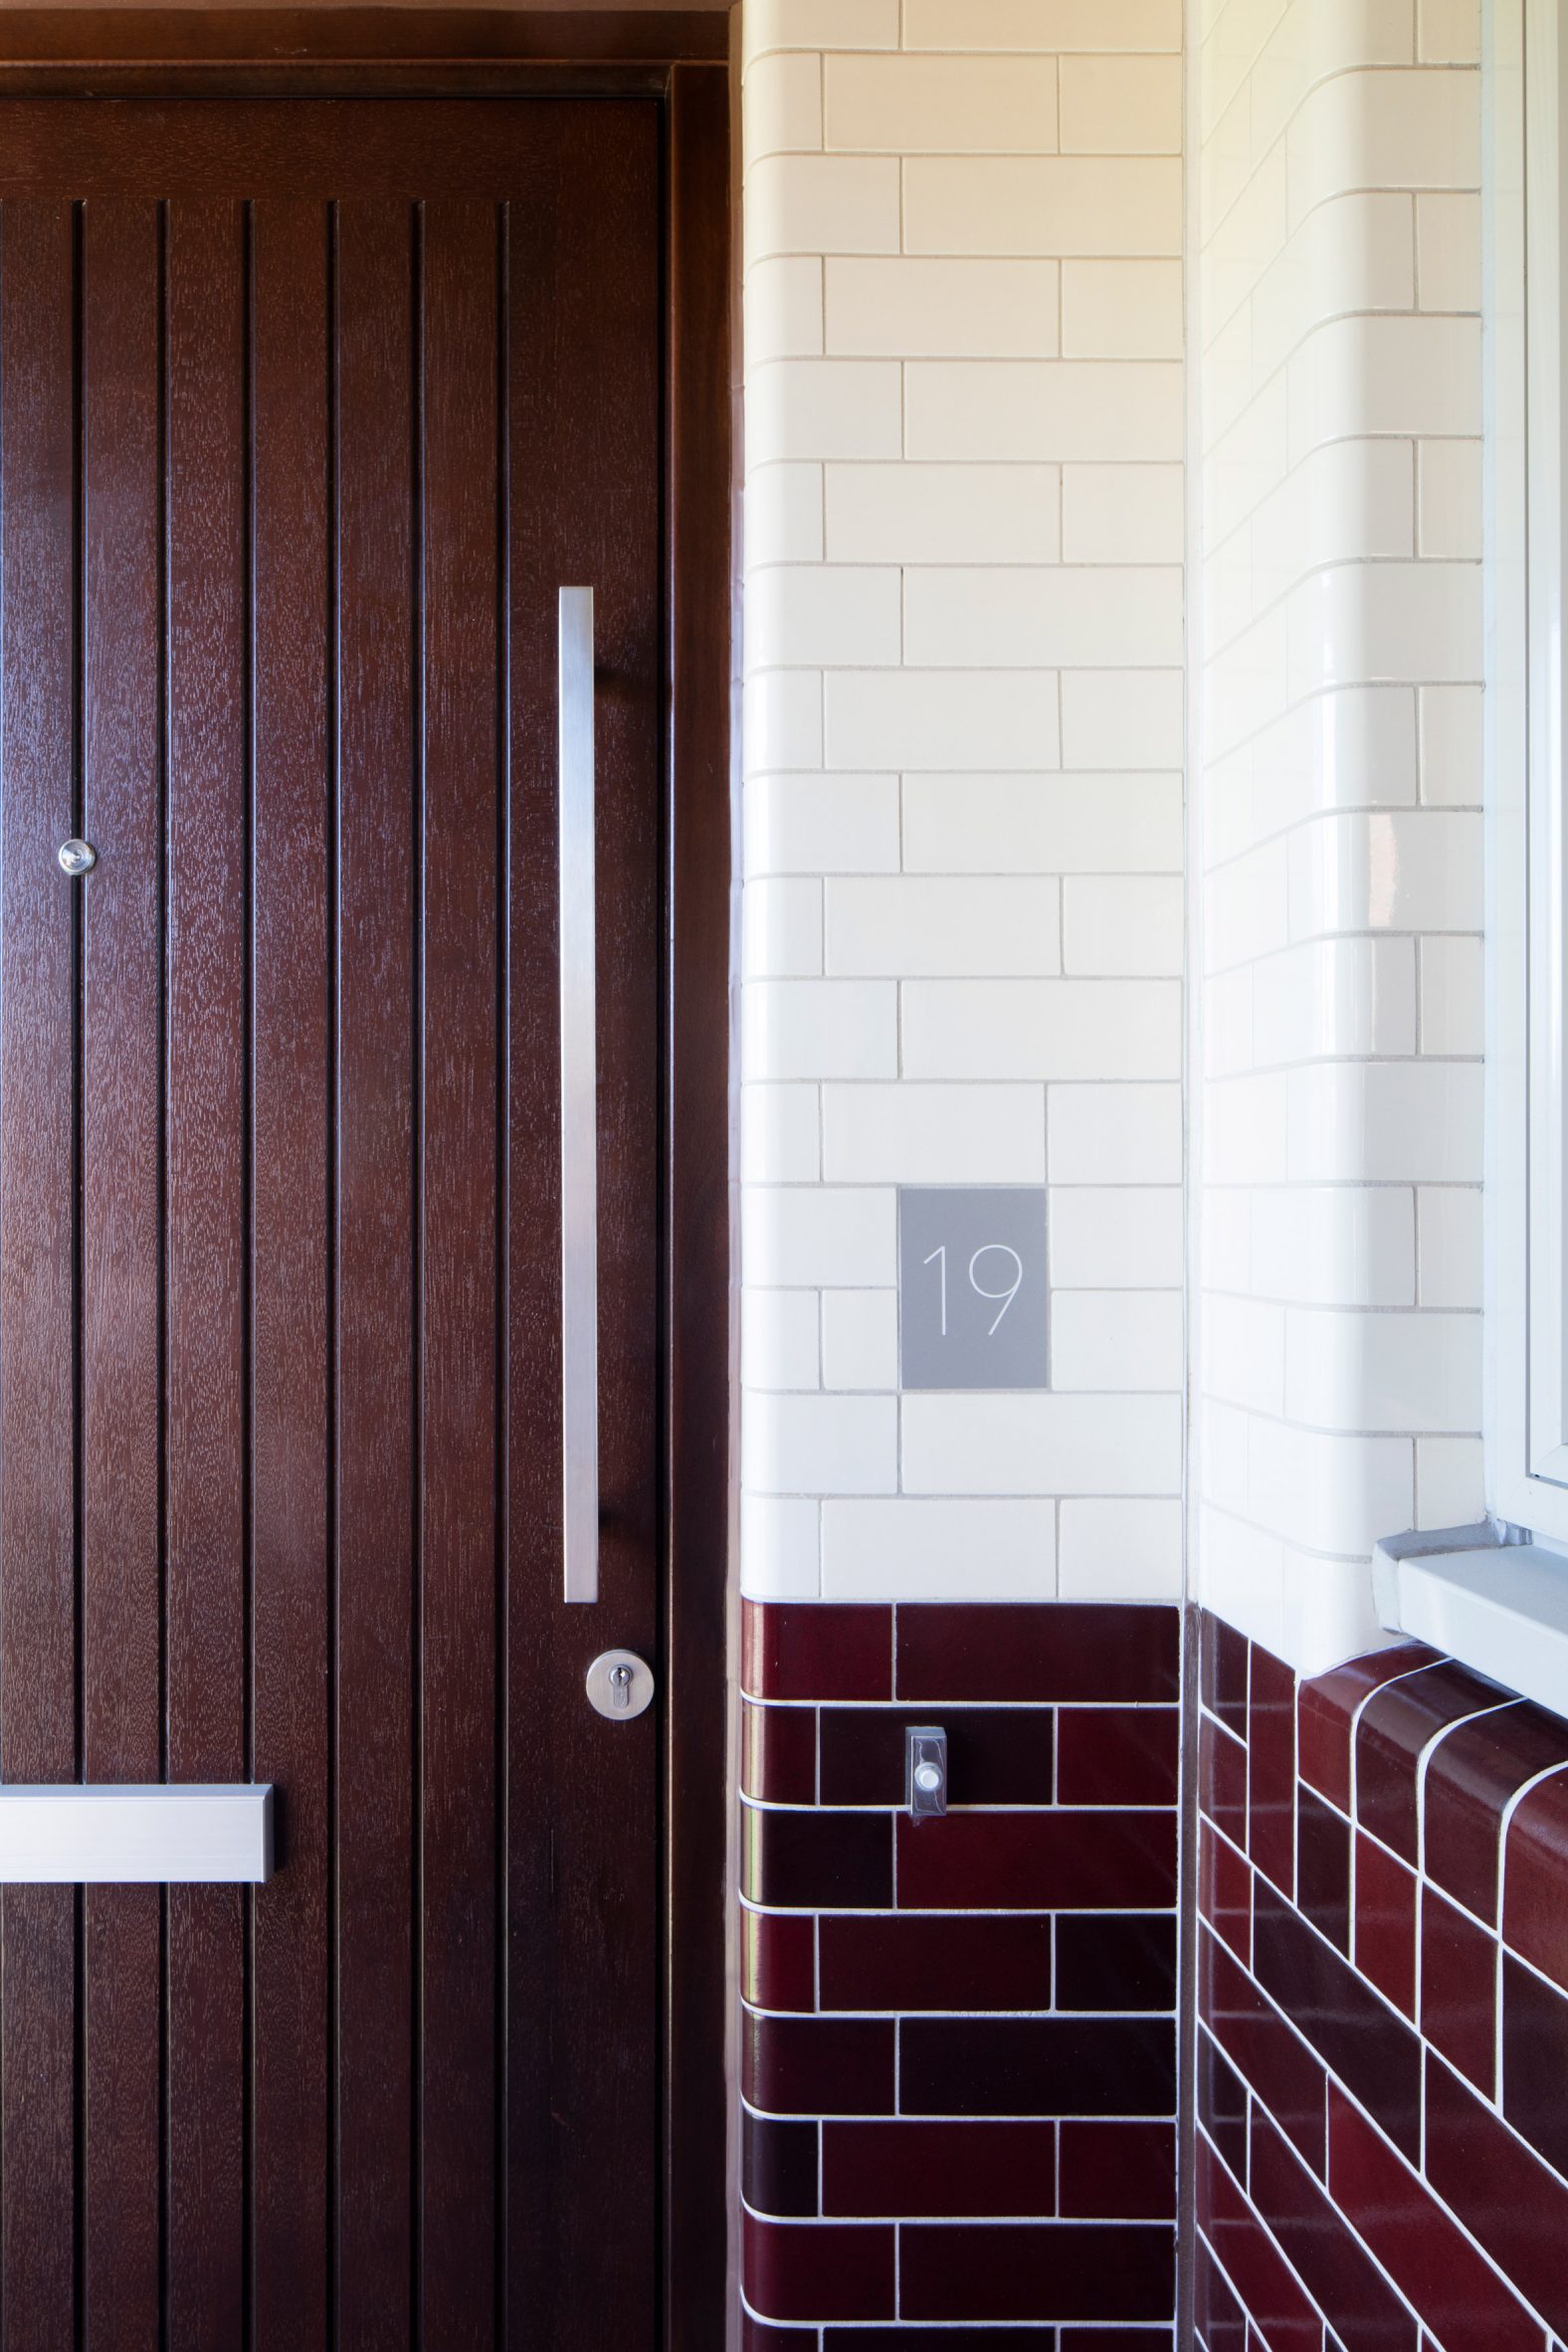 Image of apartment door at listed estate by Matthew Lloyd Architects